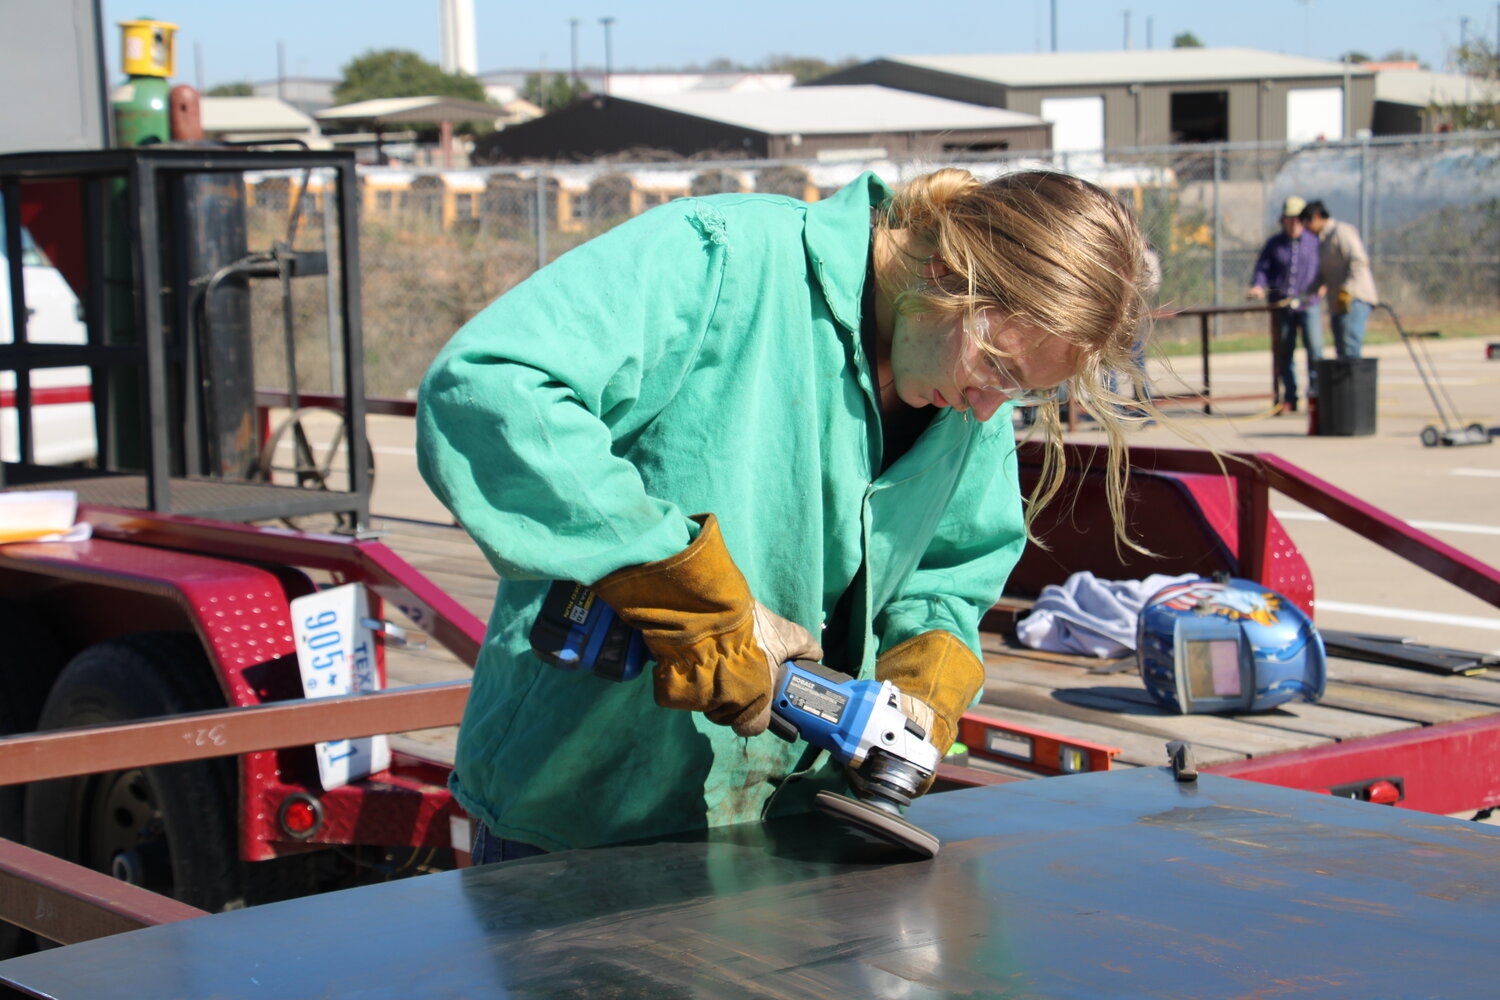 Two female welders participated in SHS’ competition in November, including Bridgeport High School senior Iva Marquesen.